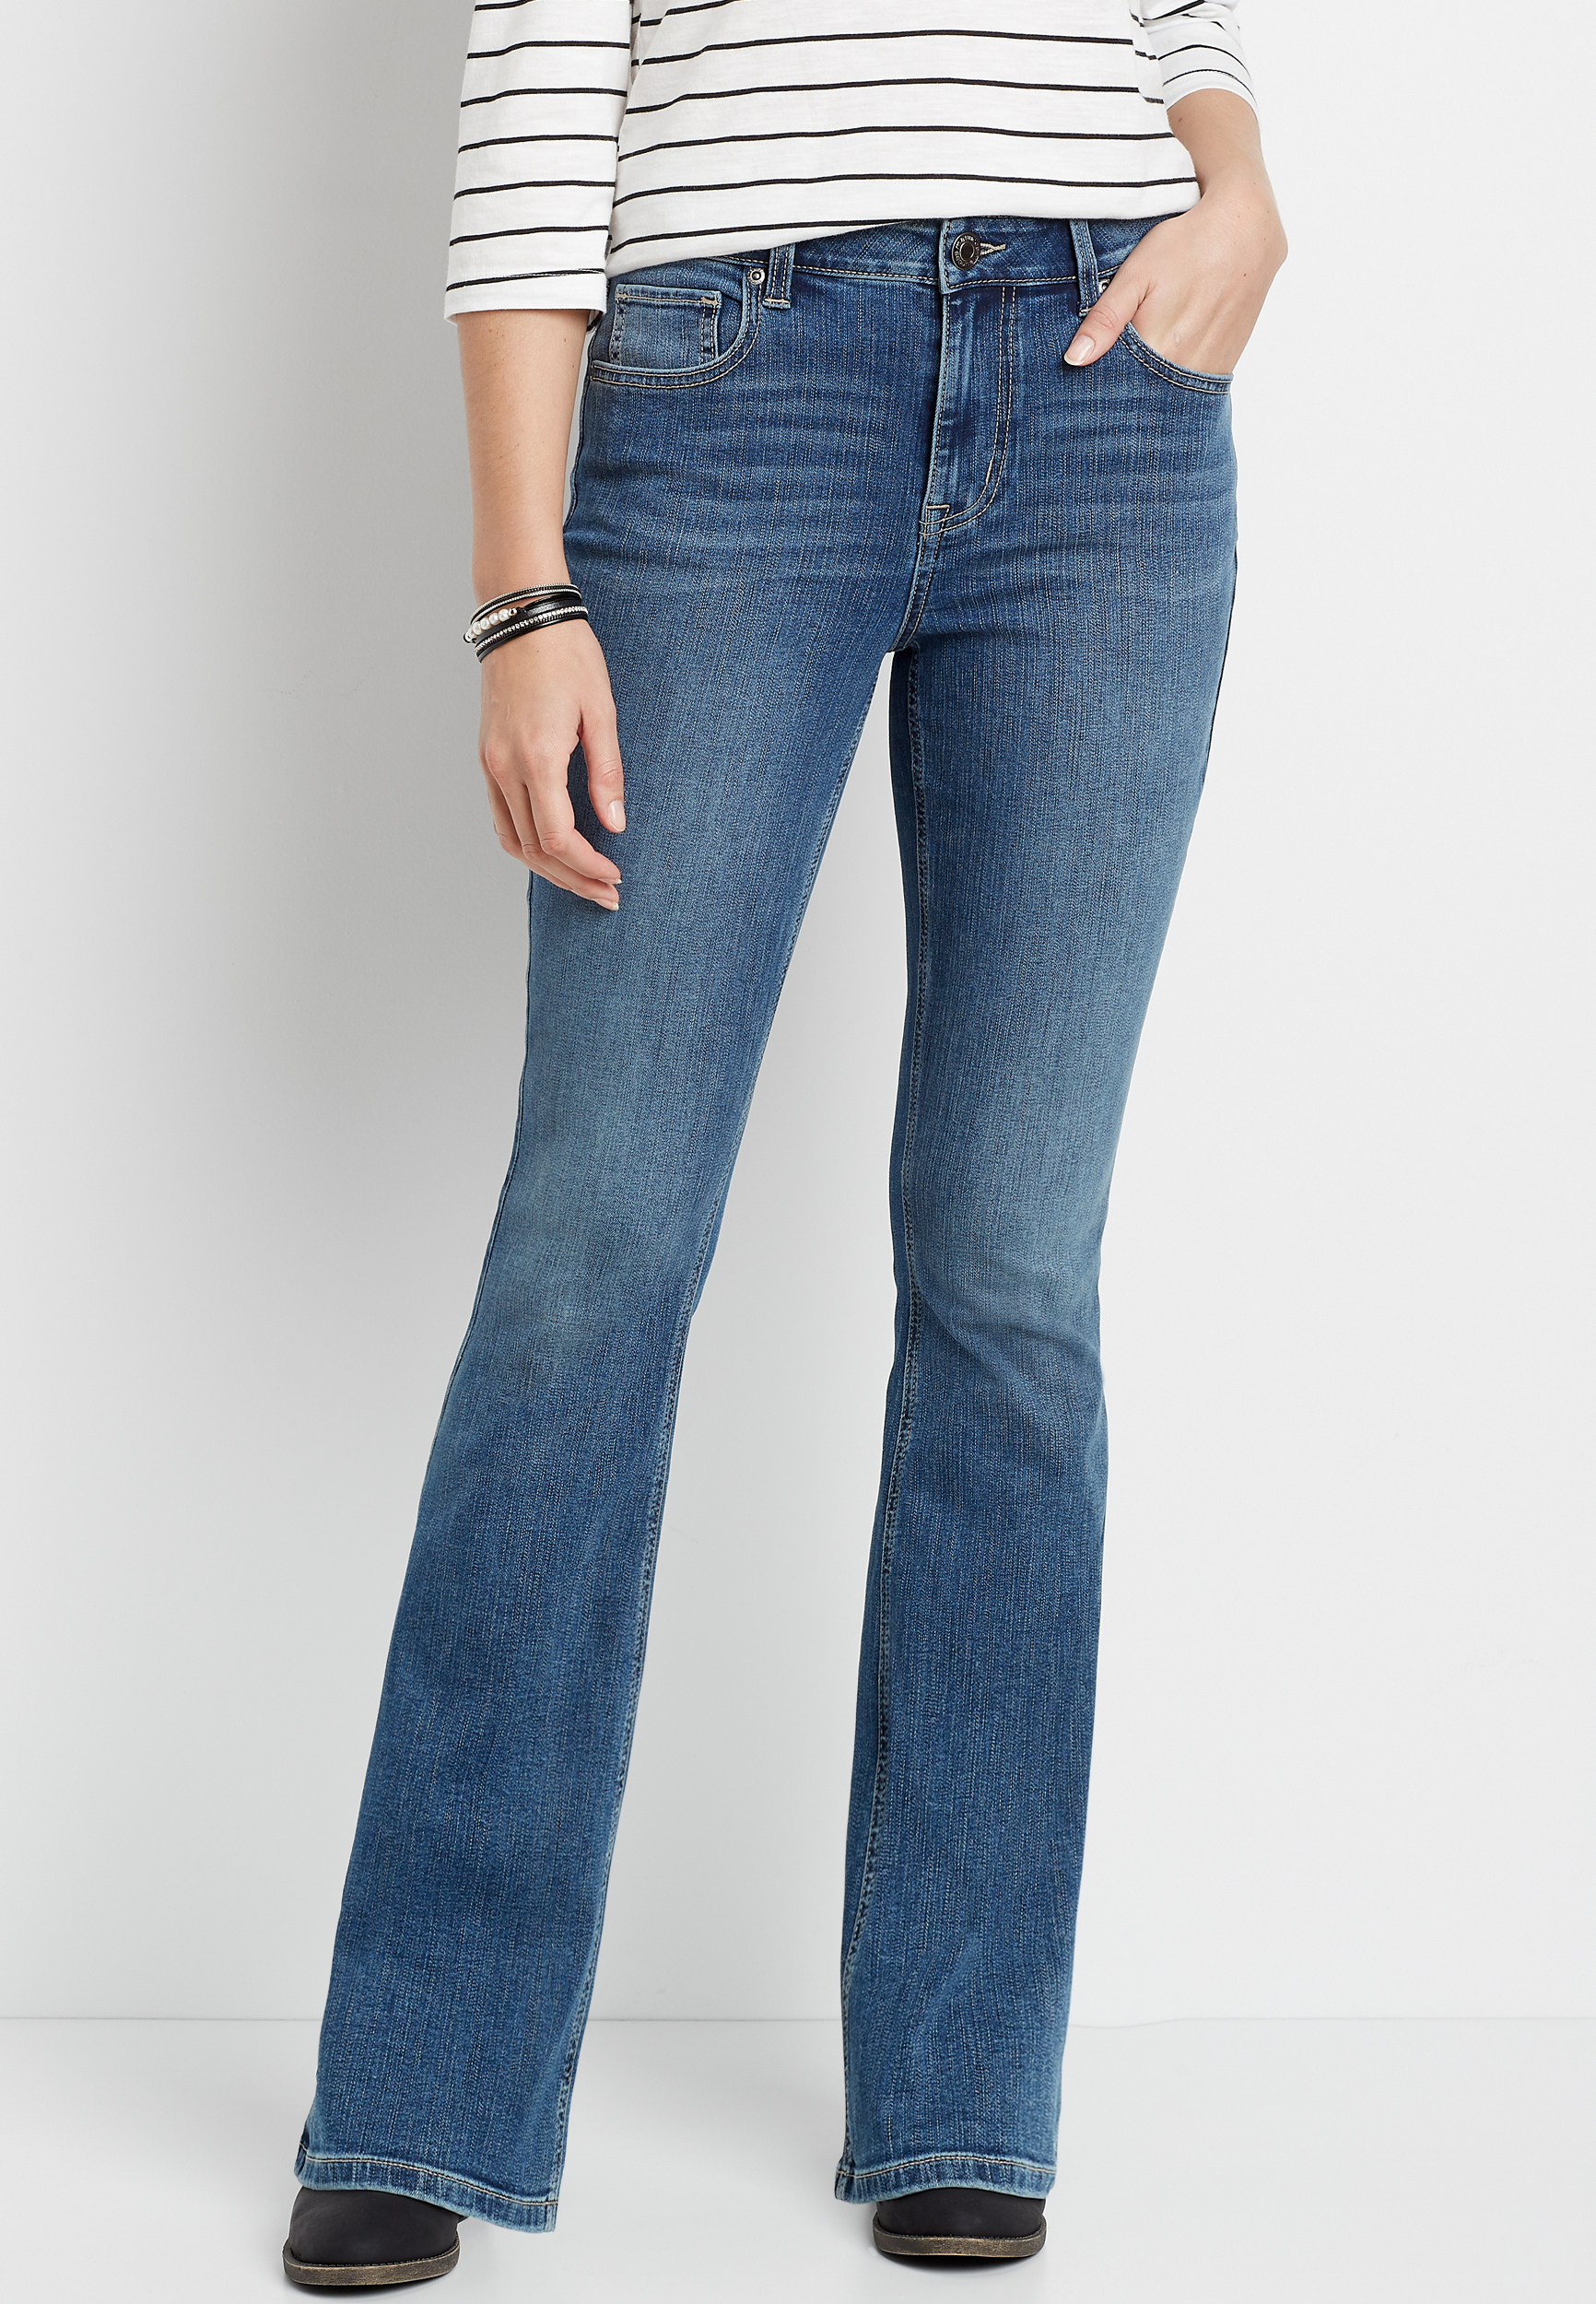 m jeans by maurices™ High Rise Medium Wash Flare Leg Jean | maurices